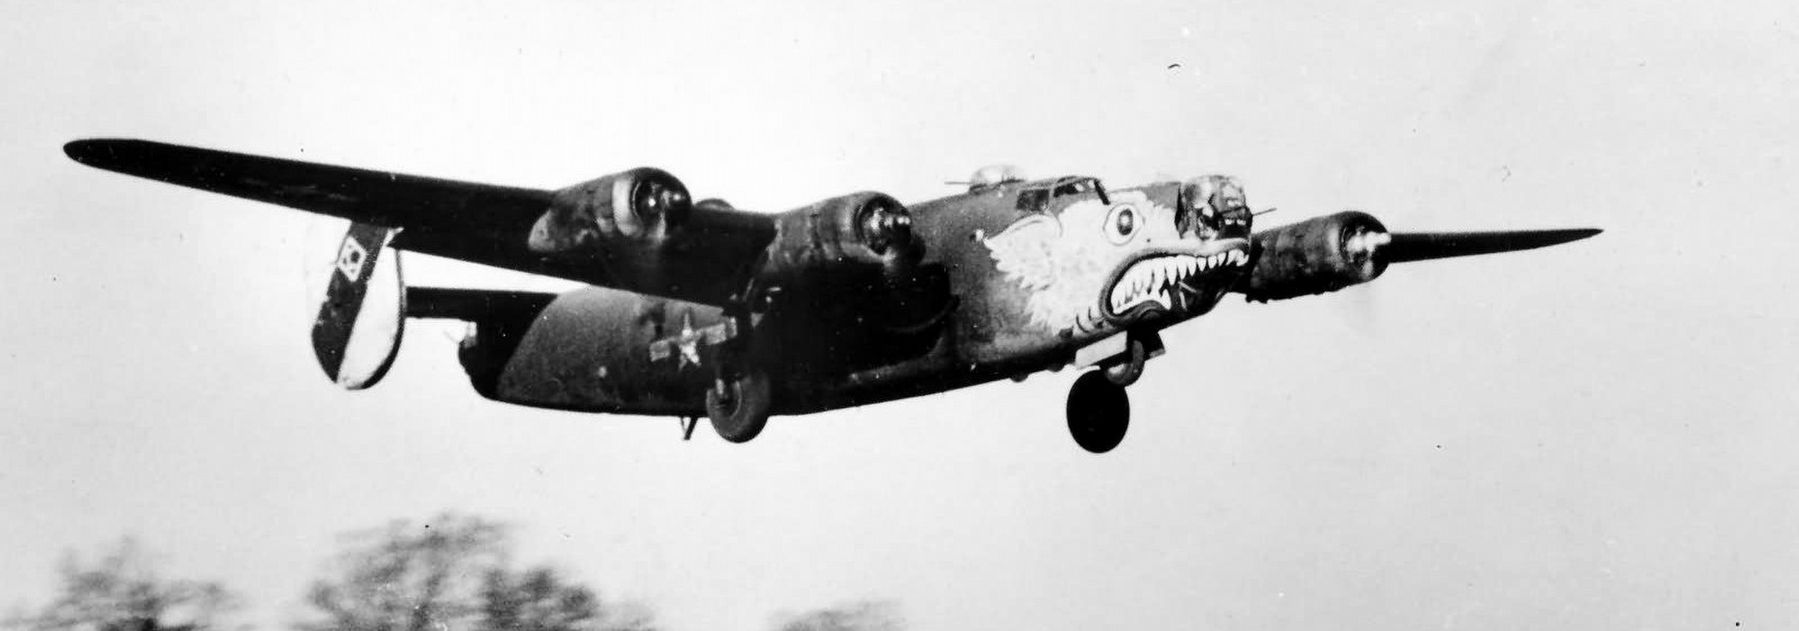 B-24 Liberator 8th Air Force 448th Bomb Group taking off from Seething, England 1944 image. Click for full size.